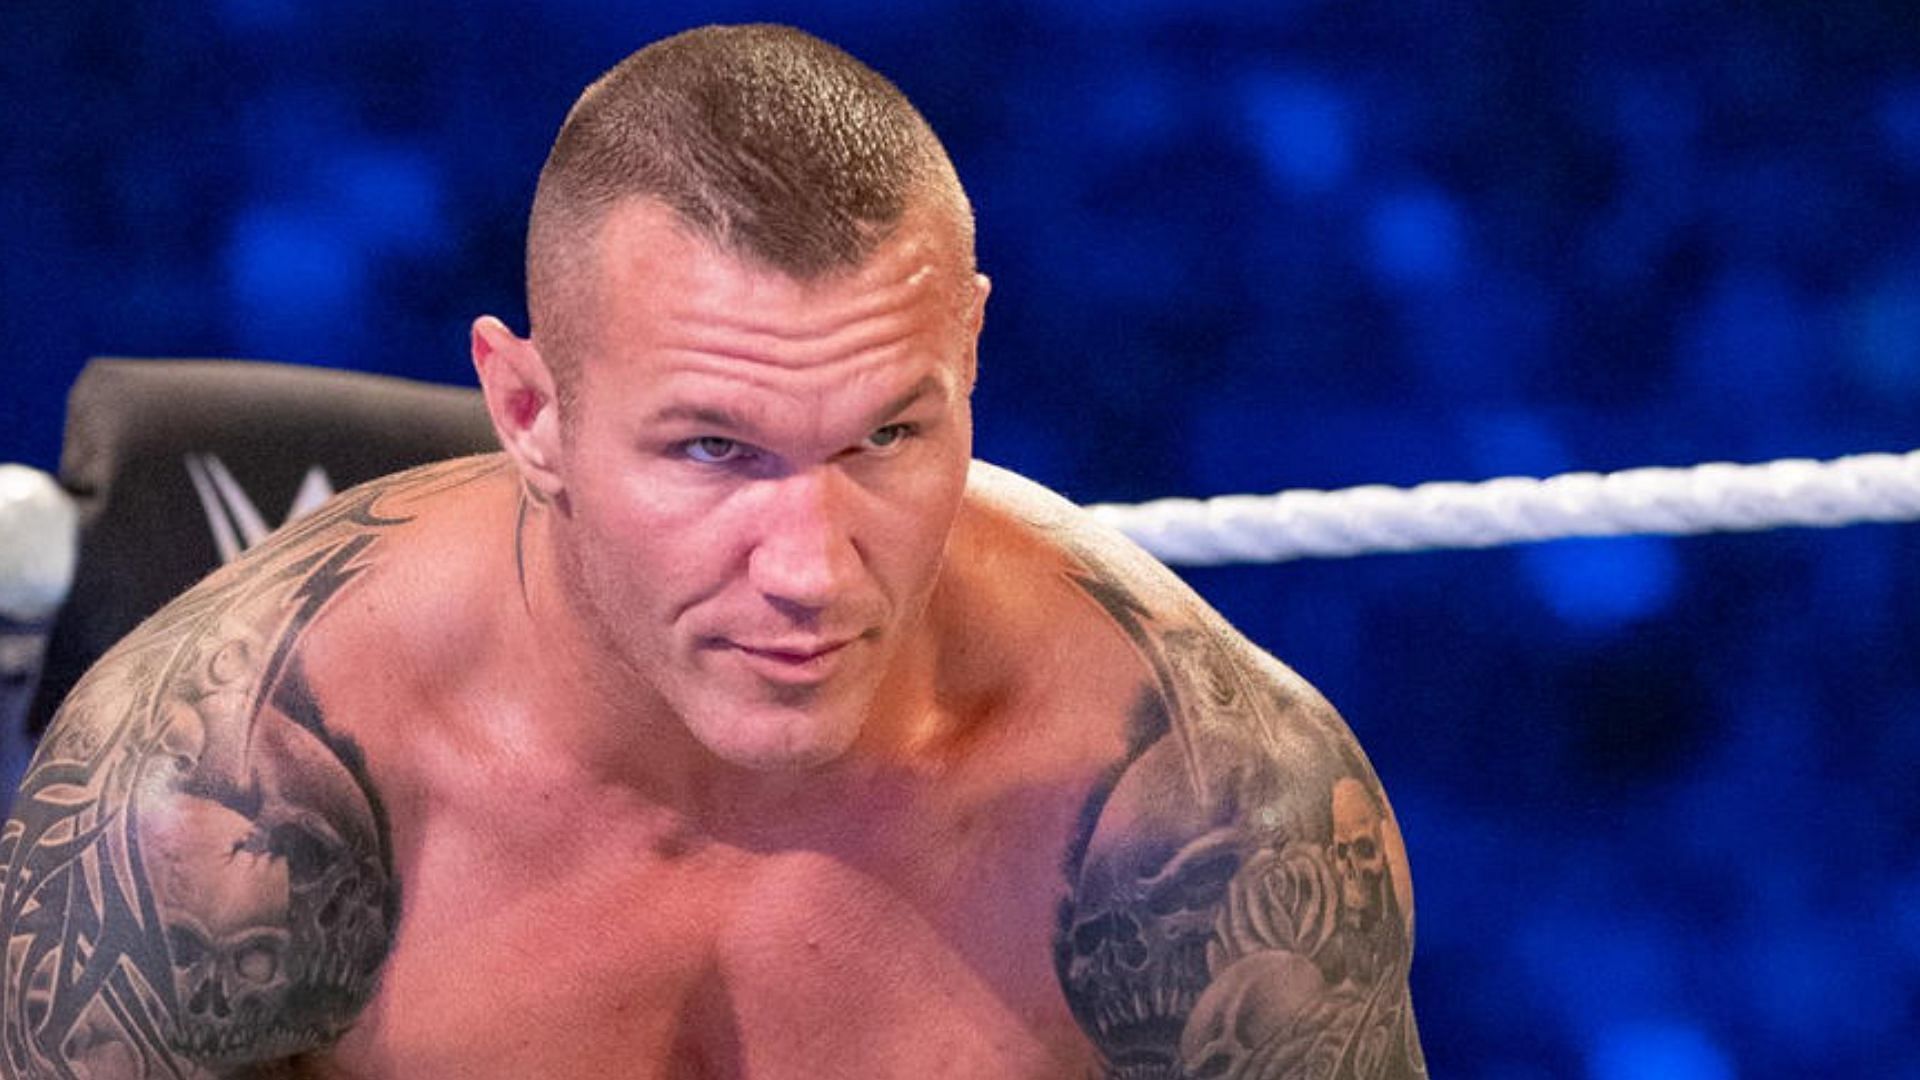 Randy Orton is after The Bloodline!